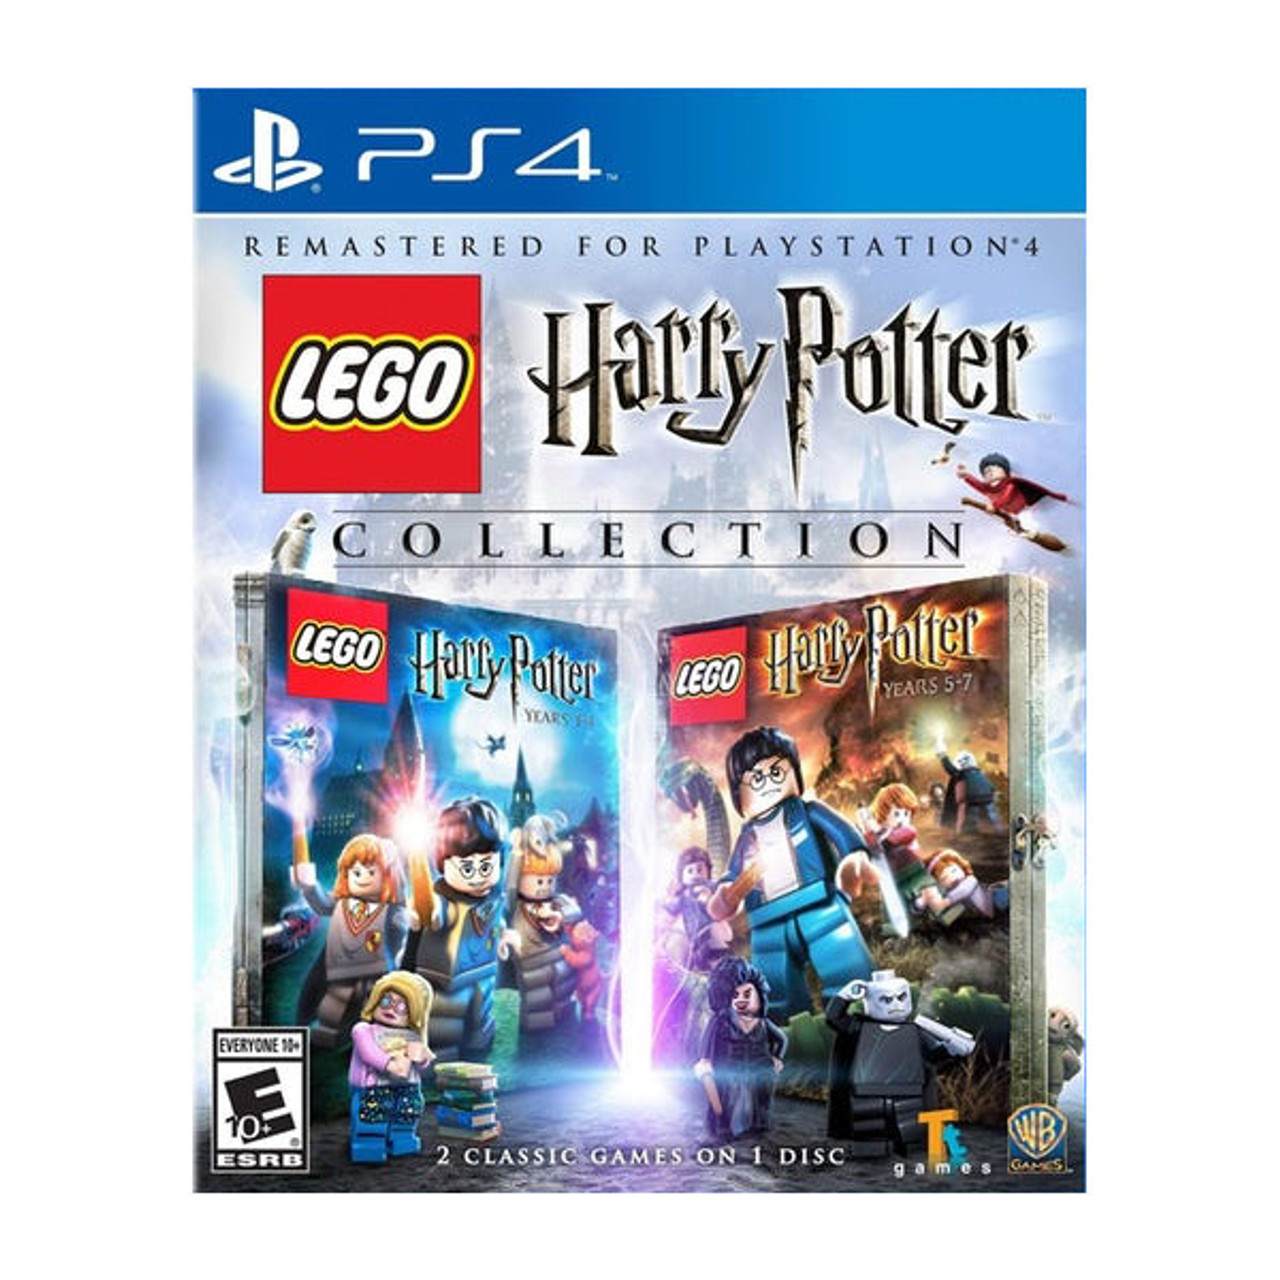 LEGO Harry Potter Collection (PS4 Playstation 4) Years 1-4 and